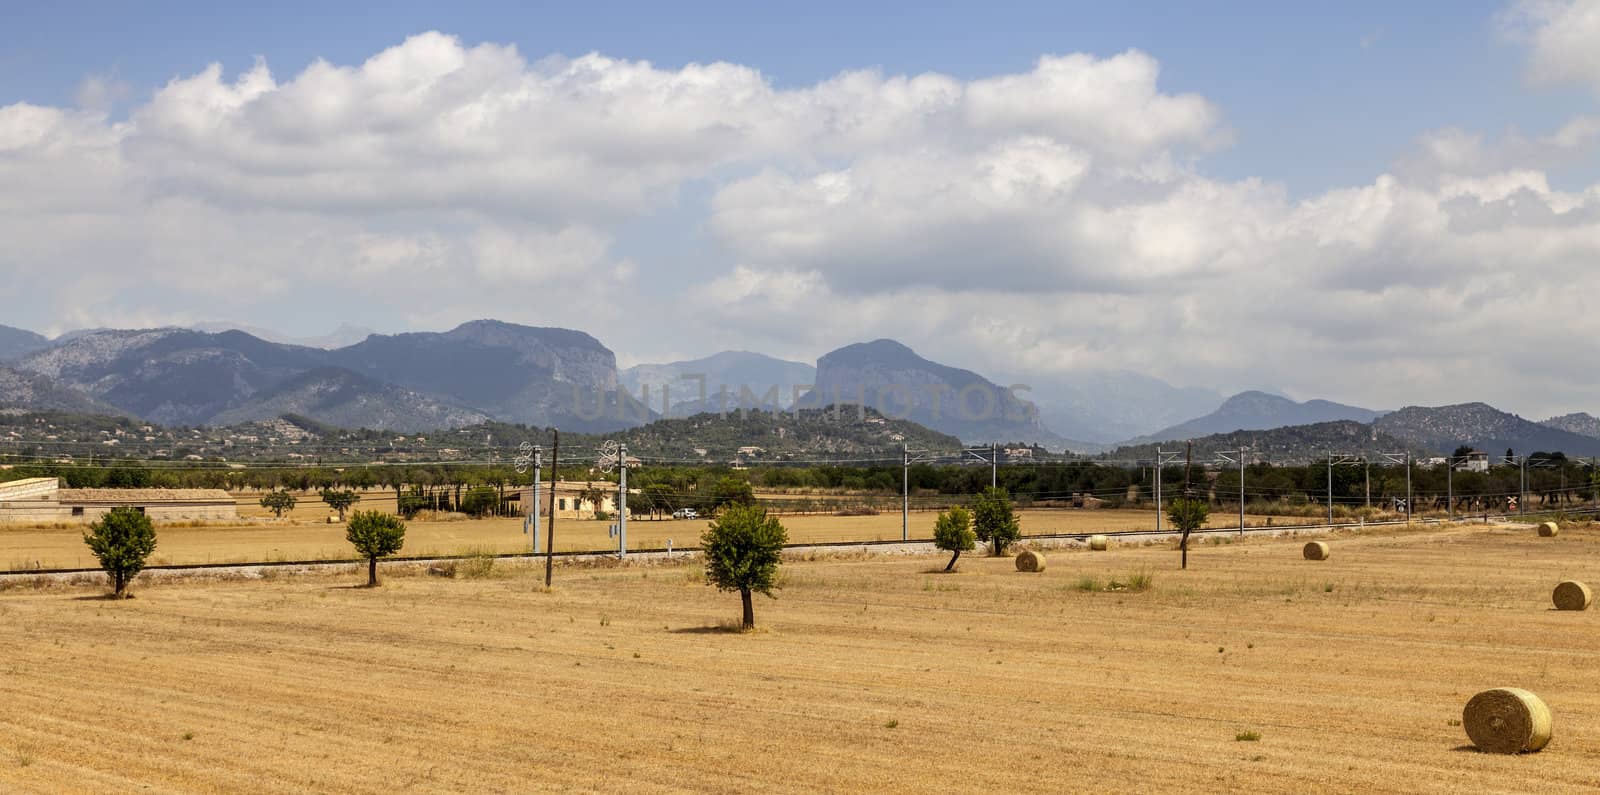 Field landscape with hay bales, Mediterranean vegetation and iconic mountains in the background (Puig d'Alaro and Puig de s'Alcadena) Located near Alaro town in Mallorca, Balearic Islands, Spain